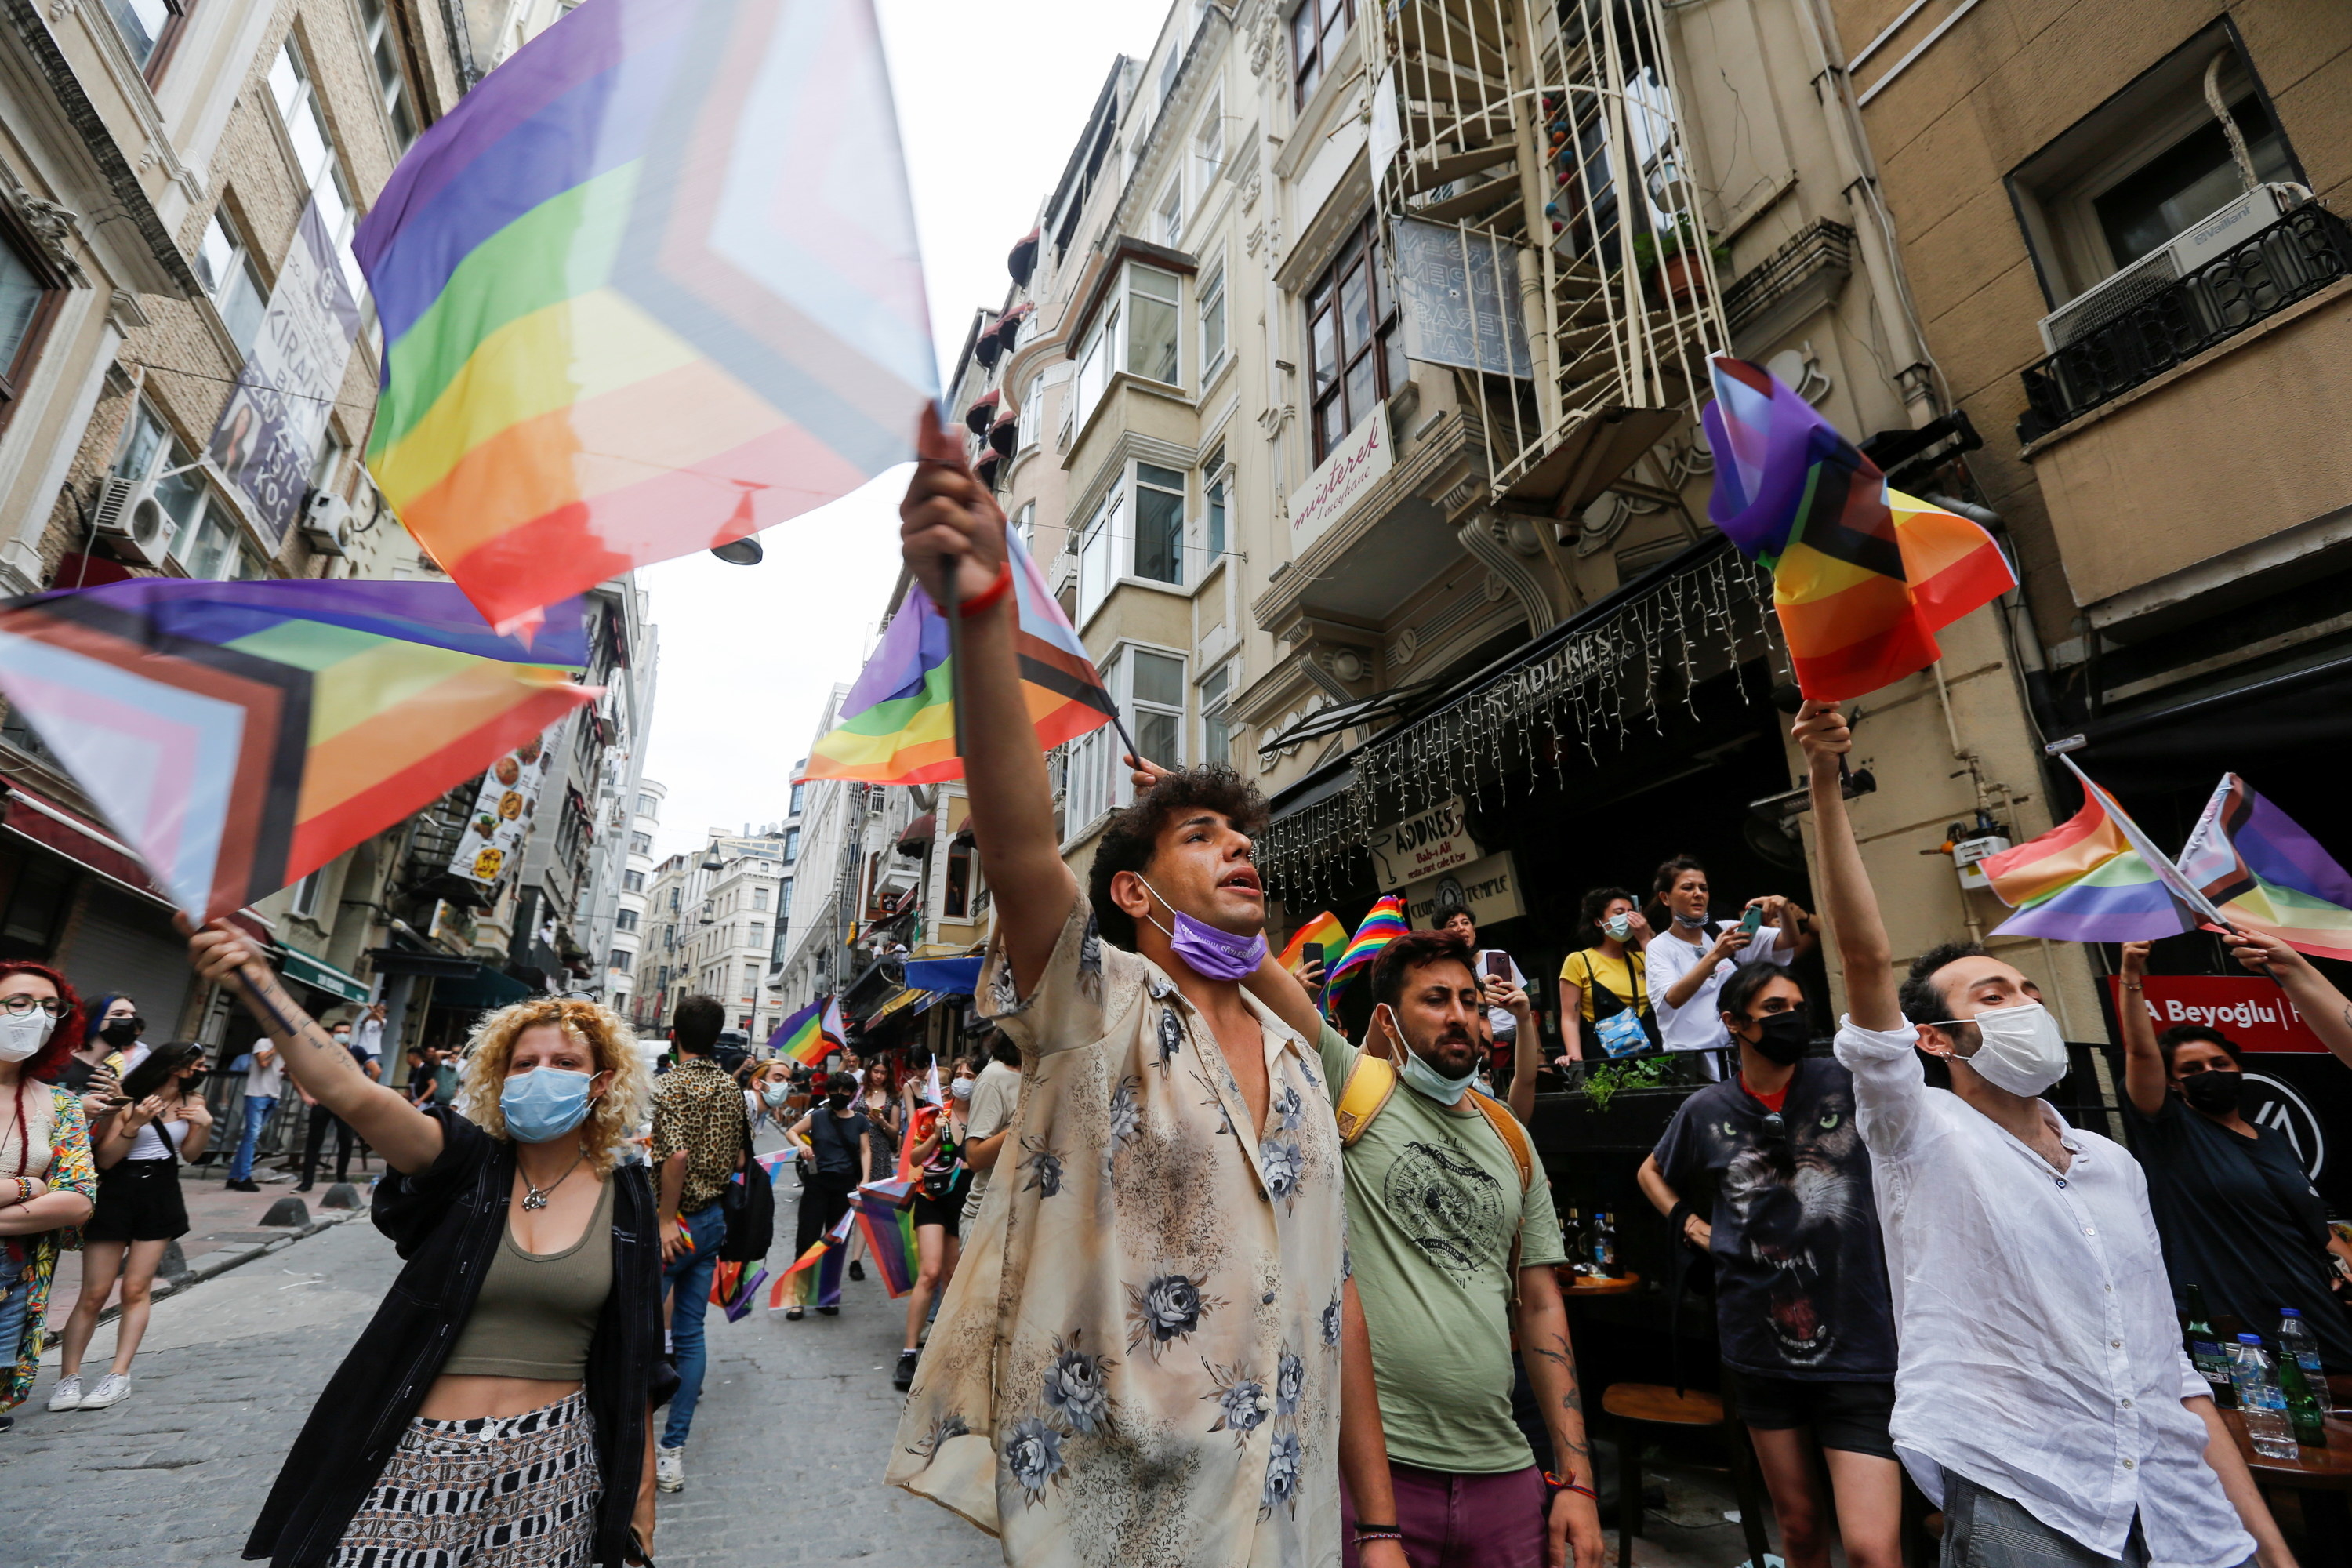 Demonstrators march with rainbow flags as they try to gather for a Pride parade, which was banned by local authorities, in central in Istanbul, Turkey June 26, 2021. REUTERS/Dilara Senkaya - RC2E8O9MC4XU